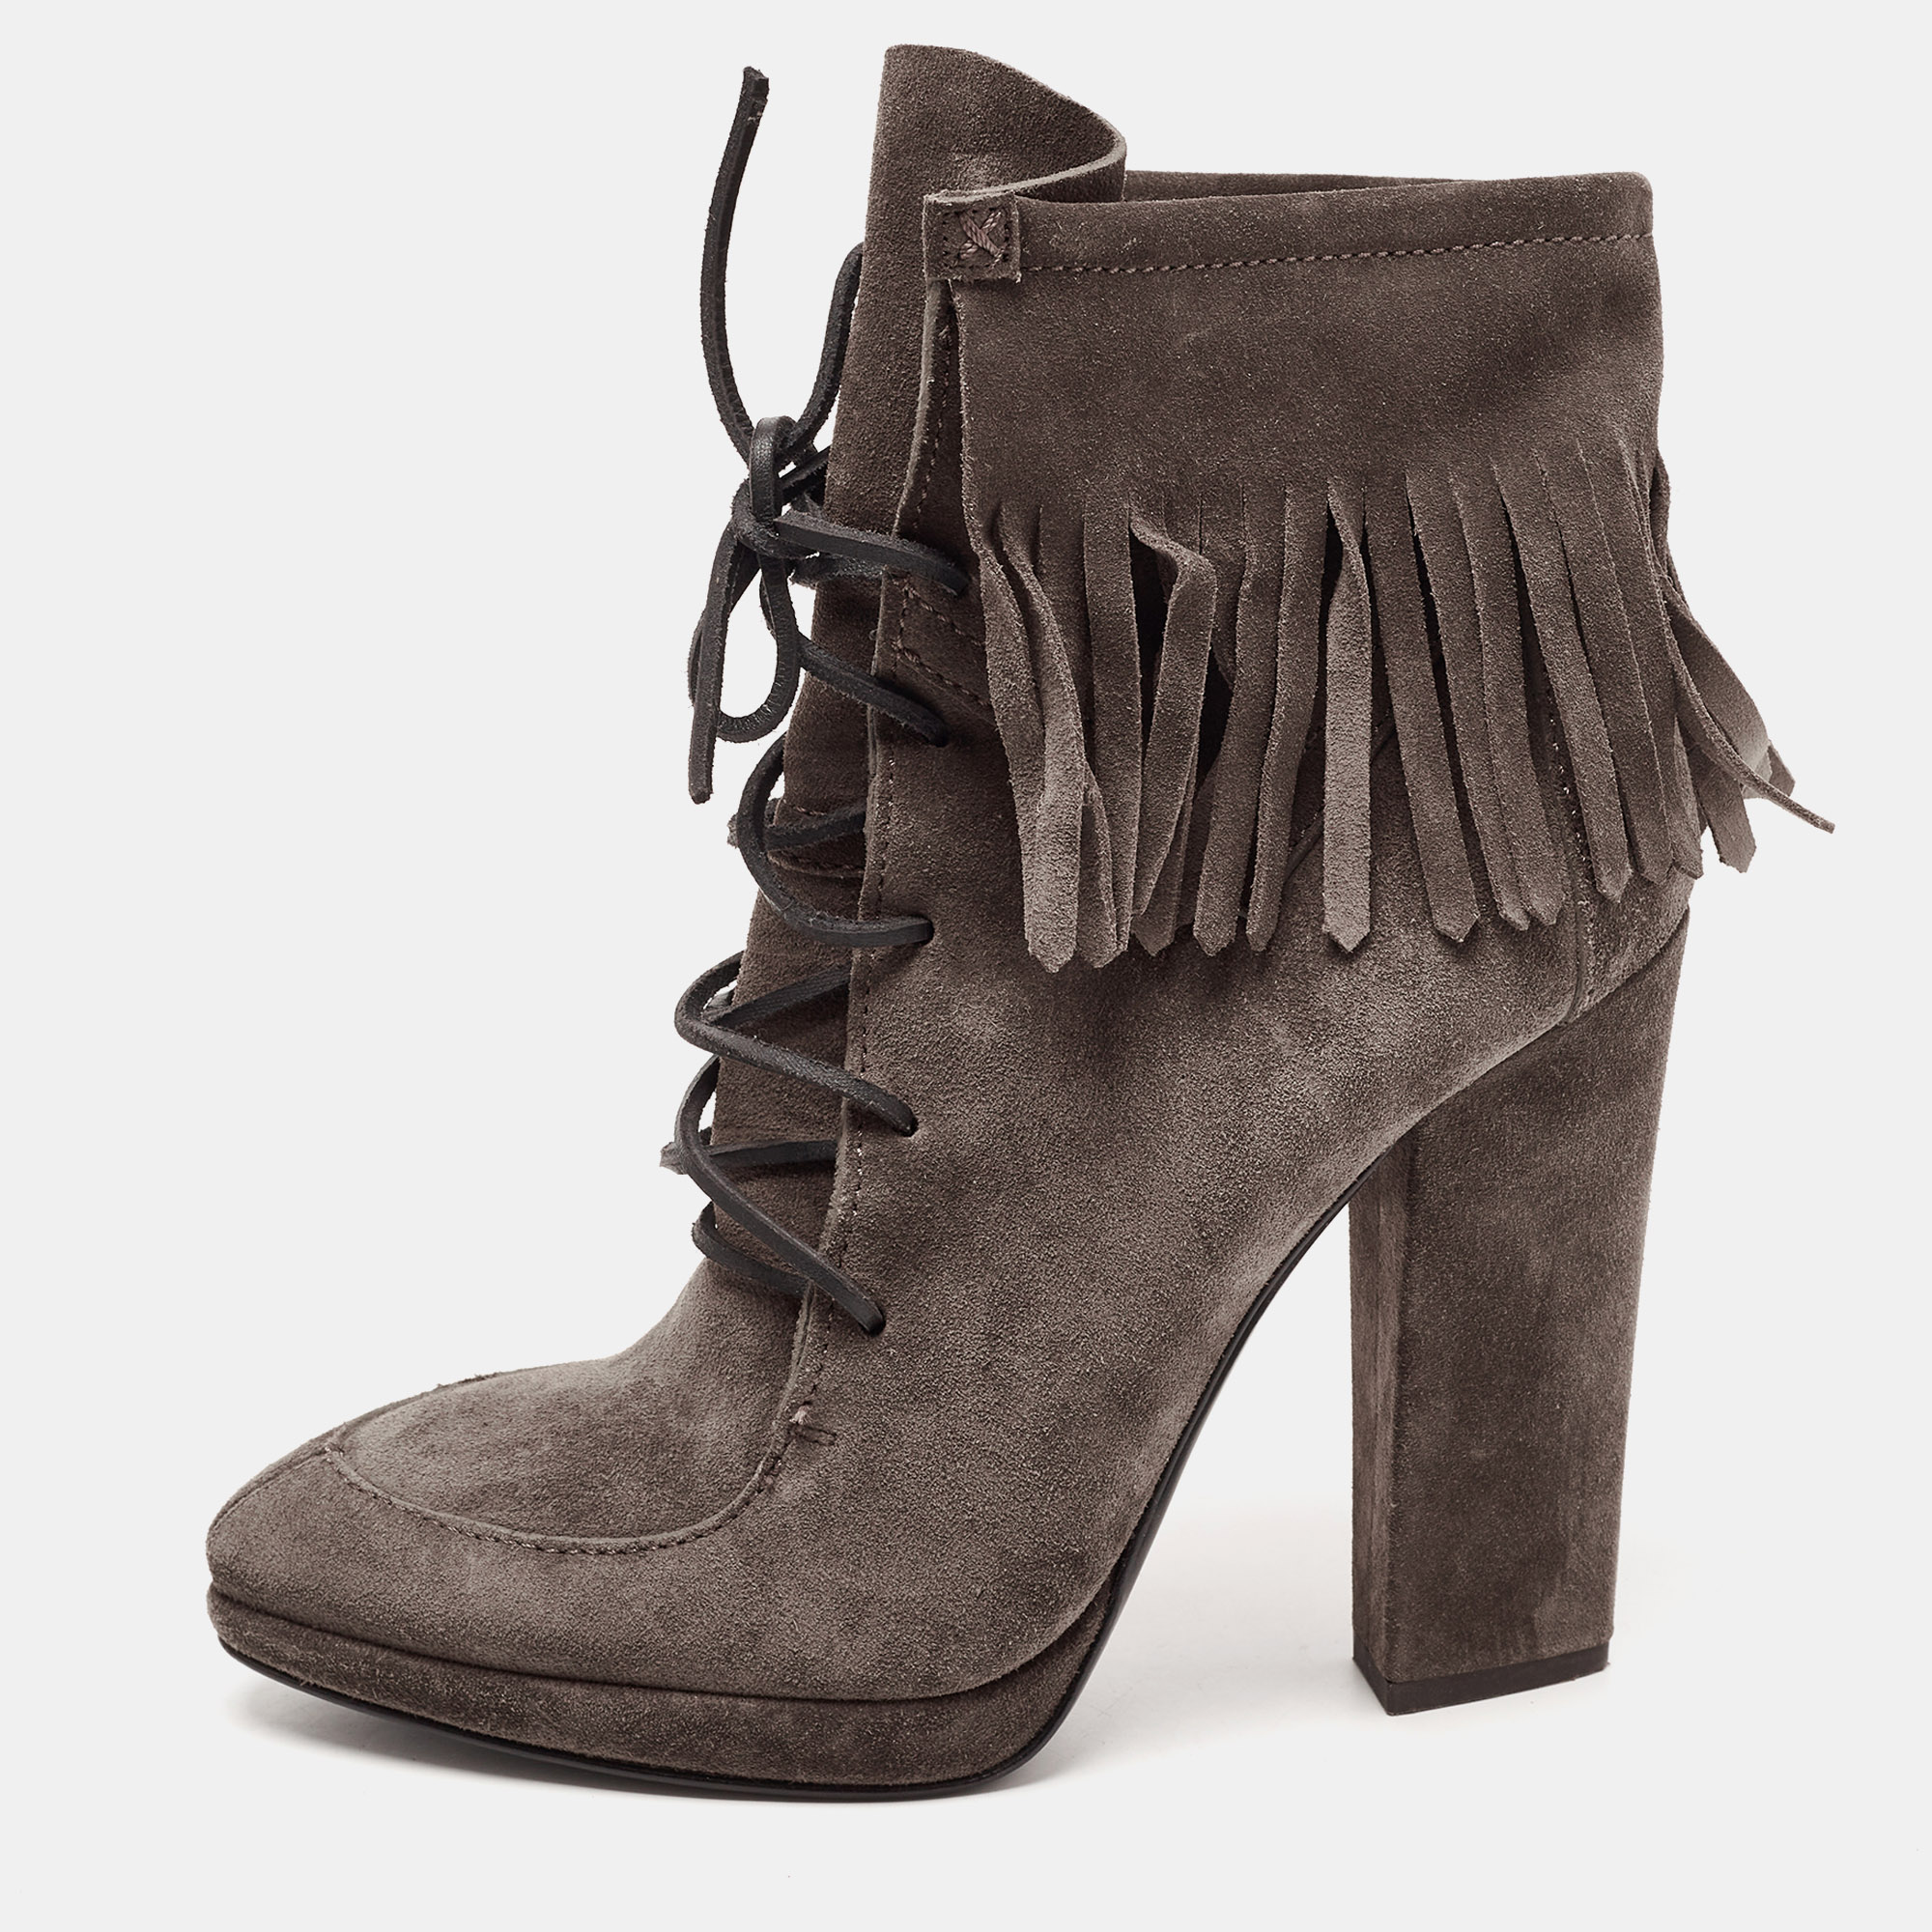 Pre-owned Giuseppe Zanotti Dark Grey Suede Fringe Detail Ankle Booties Size 39